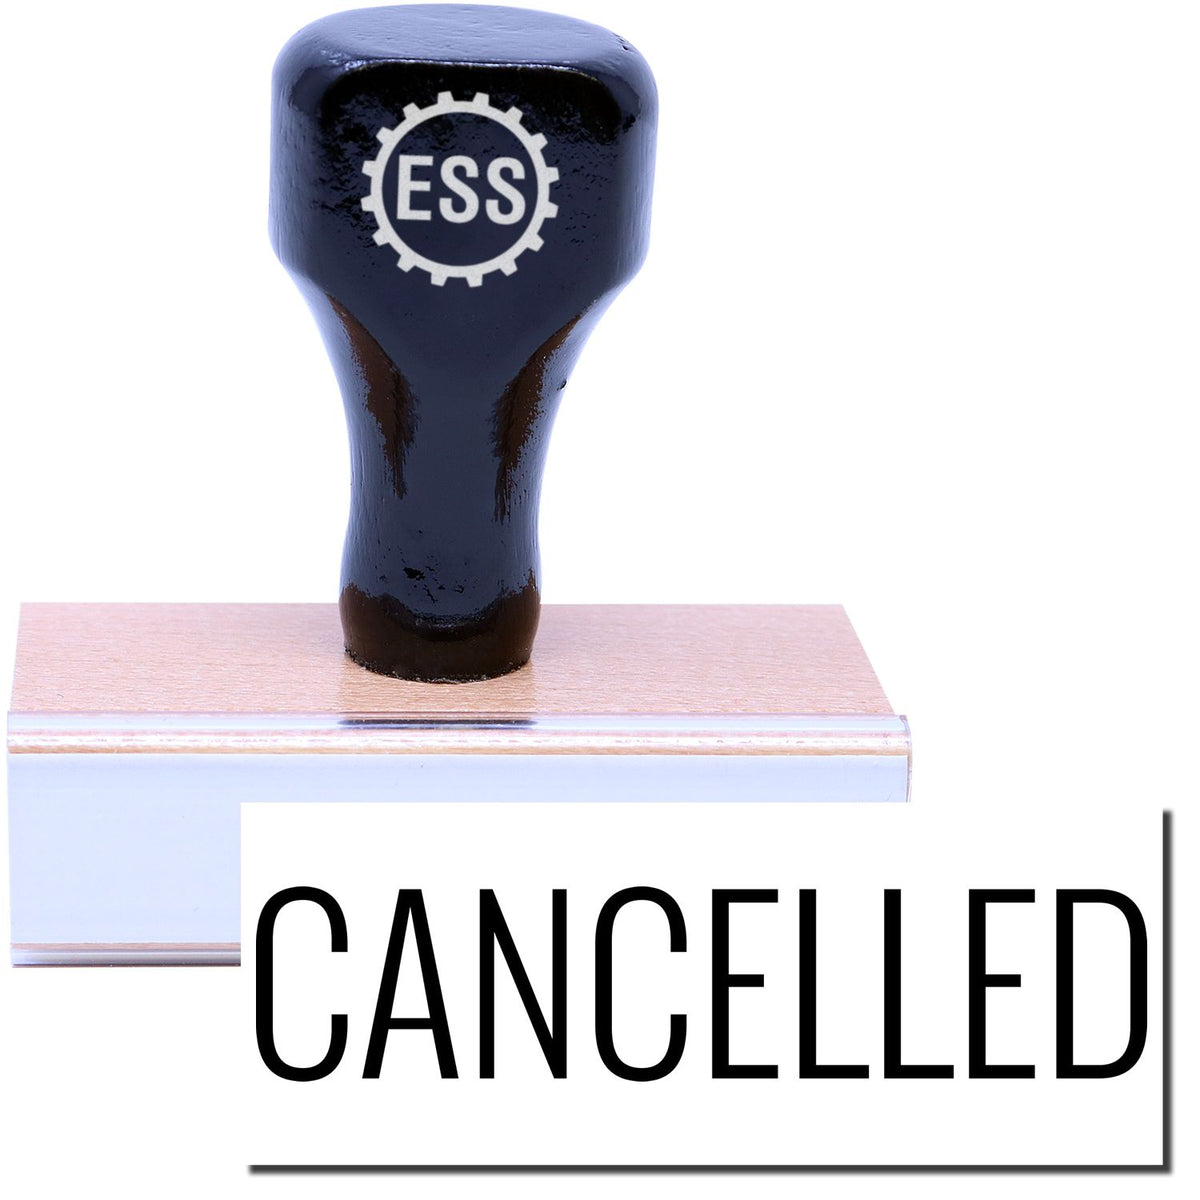 A stock office rubber stamp with a stamped image showing how the text &quot;CANCELLED&quot; in a narrow font is displayed after stamping.